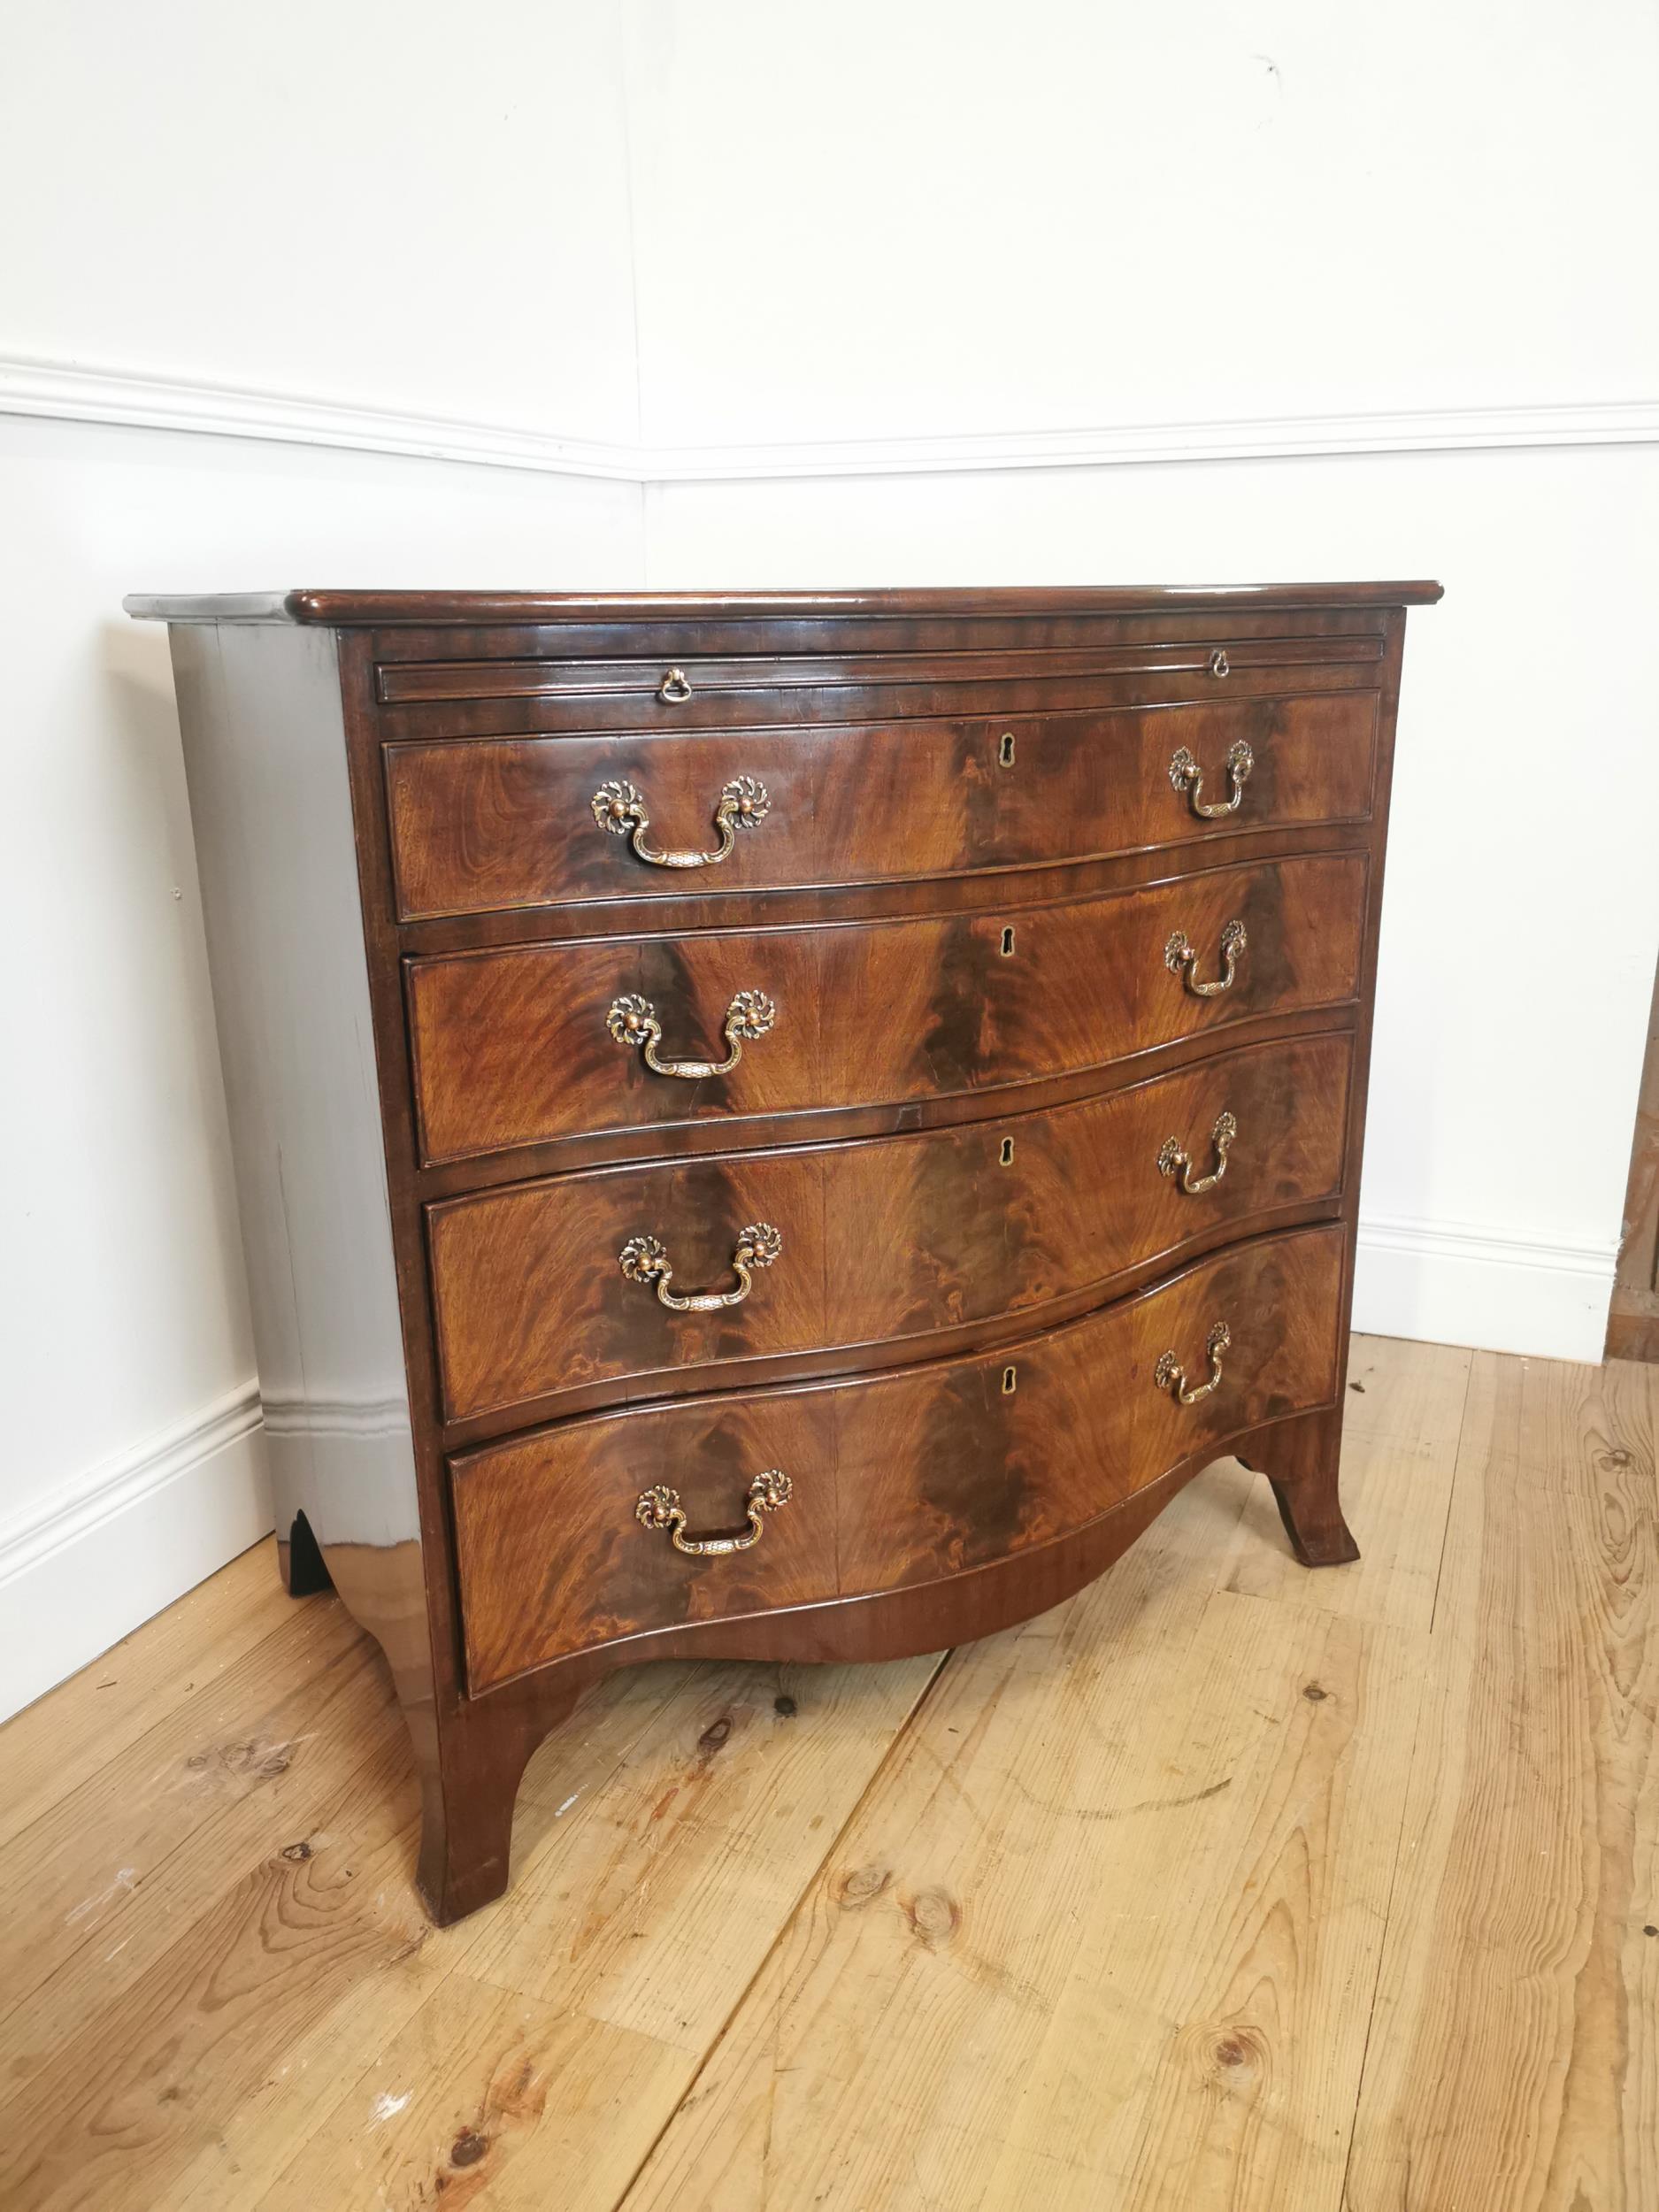 Good quality Edwardian serpentine fronted chest of drawers with four graduated drawers with brushing